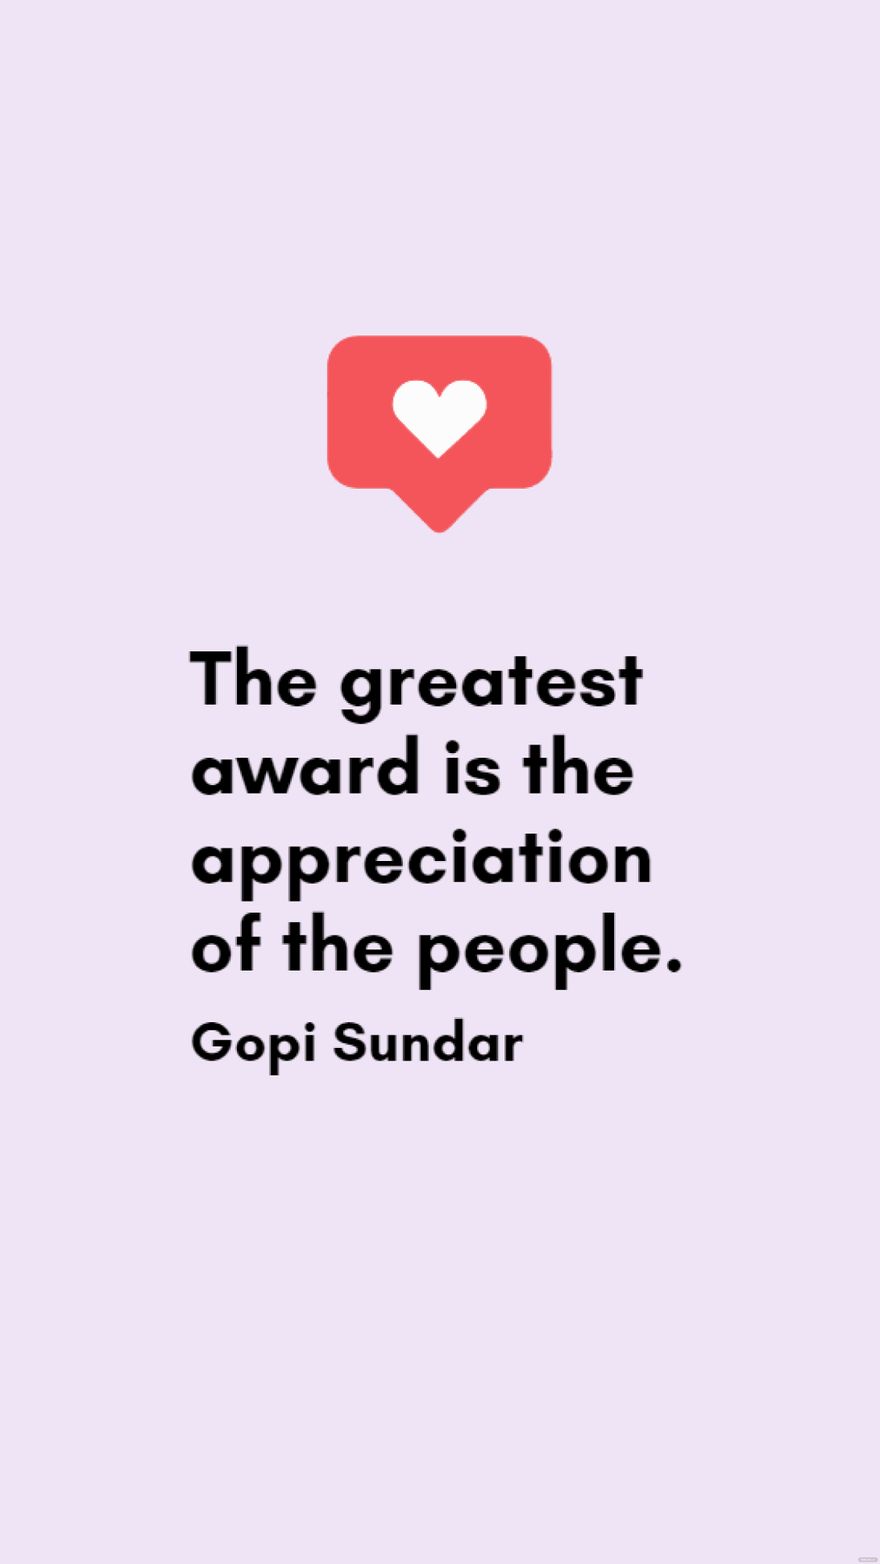 Free Gopi Sundar - The greatest award is the appreciation of the people. in JPG